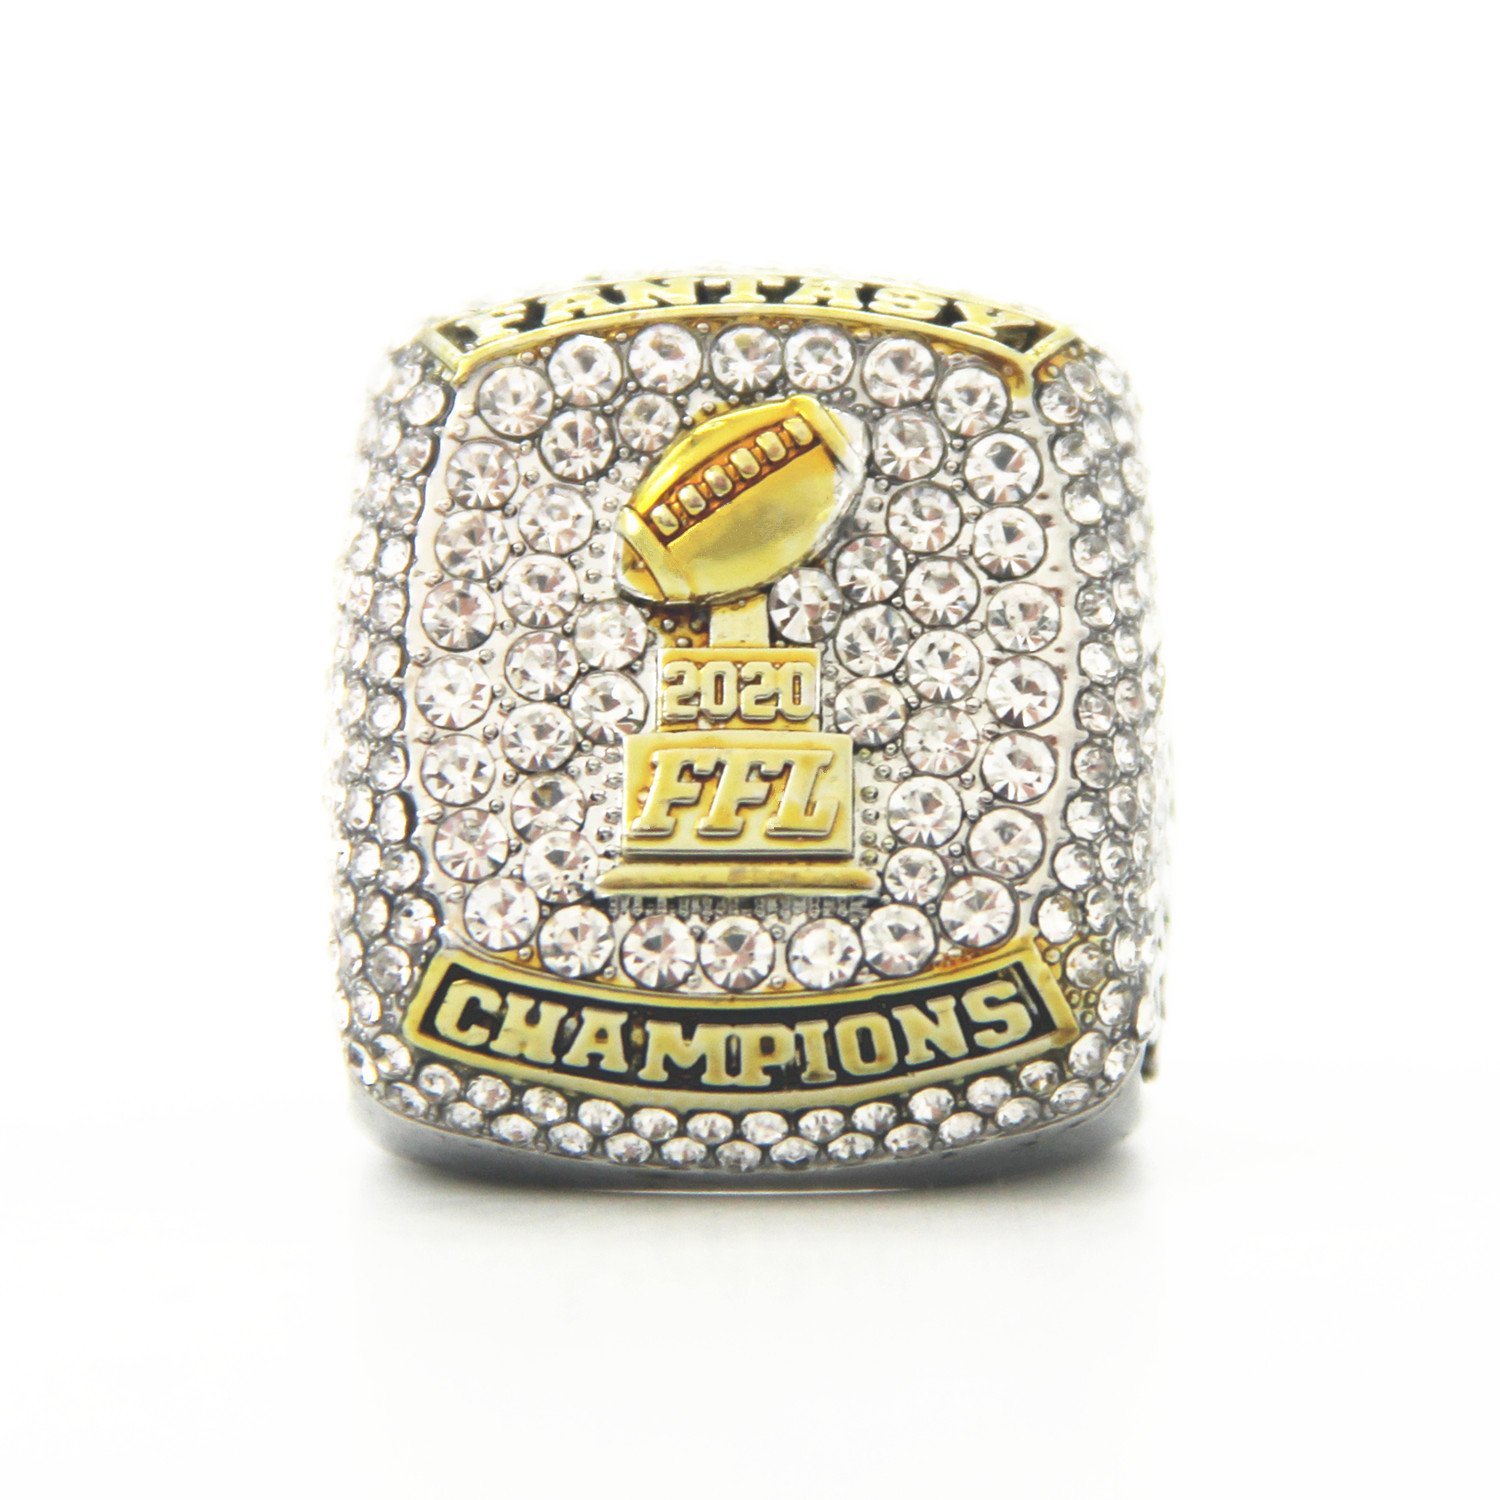 2019 The Newest 2020 Fantasy Football Championship Ring Fan Gift wholesale Drop Shipping US SIZE 11# от DHgate WW